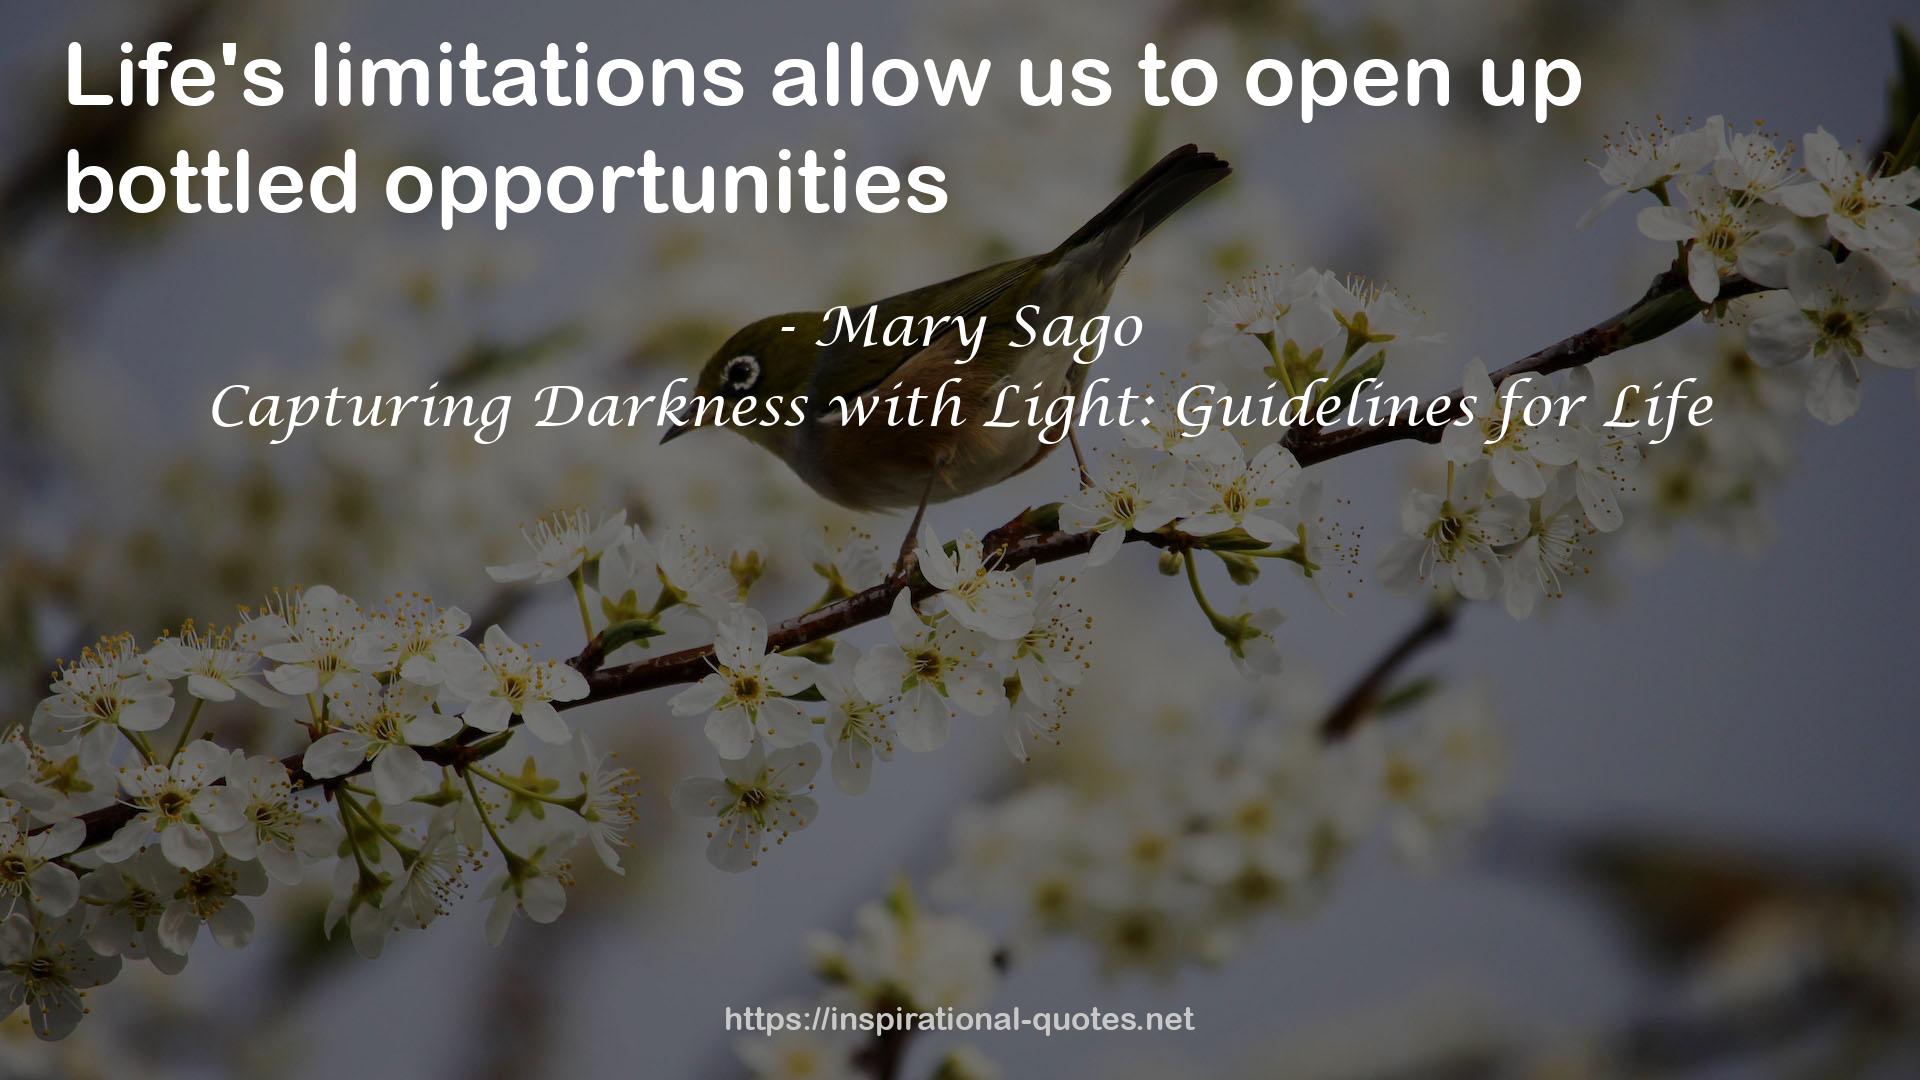 Capturing Darkness with Light: Guidelines for Life QUOTES